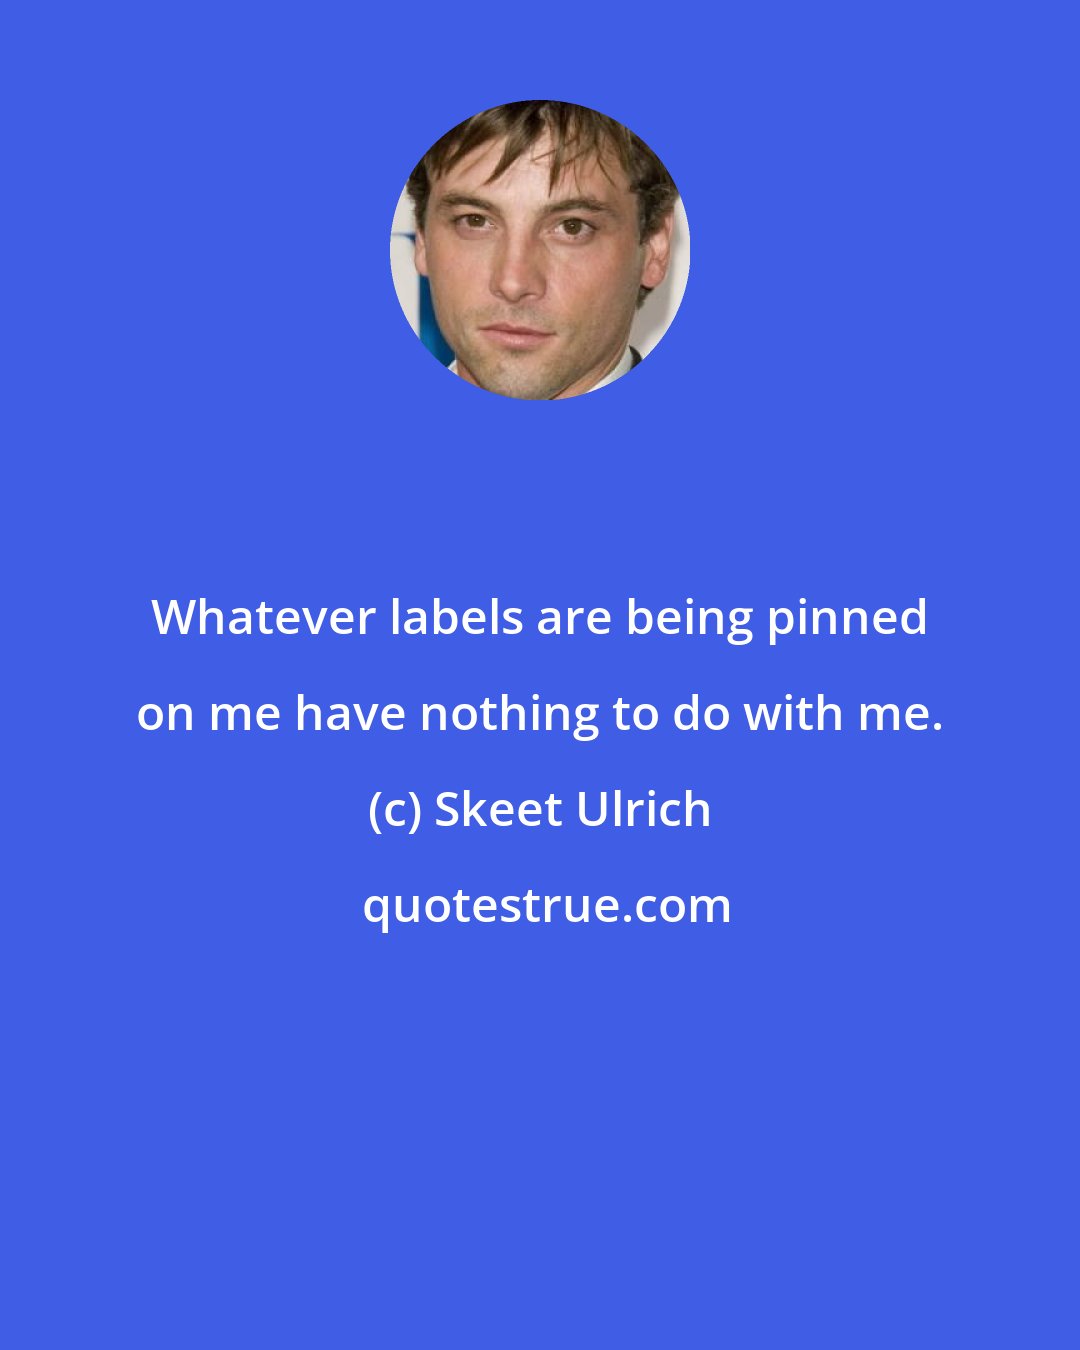 Skeet Ulrich: Whatever labels are being pinned on me have nothing to do with me.